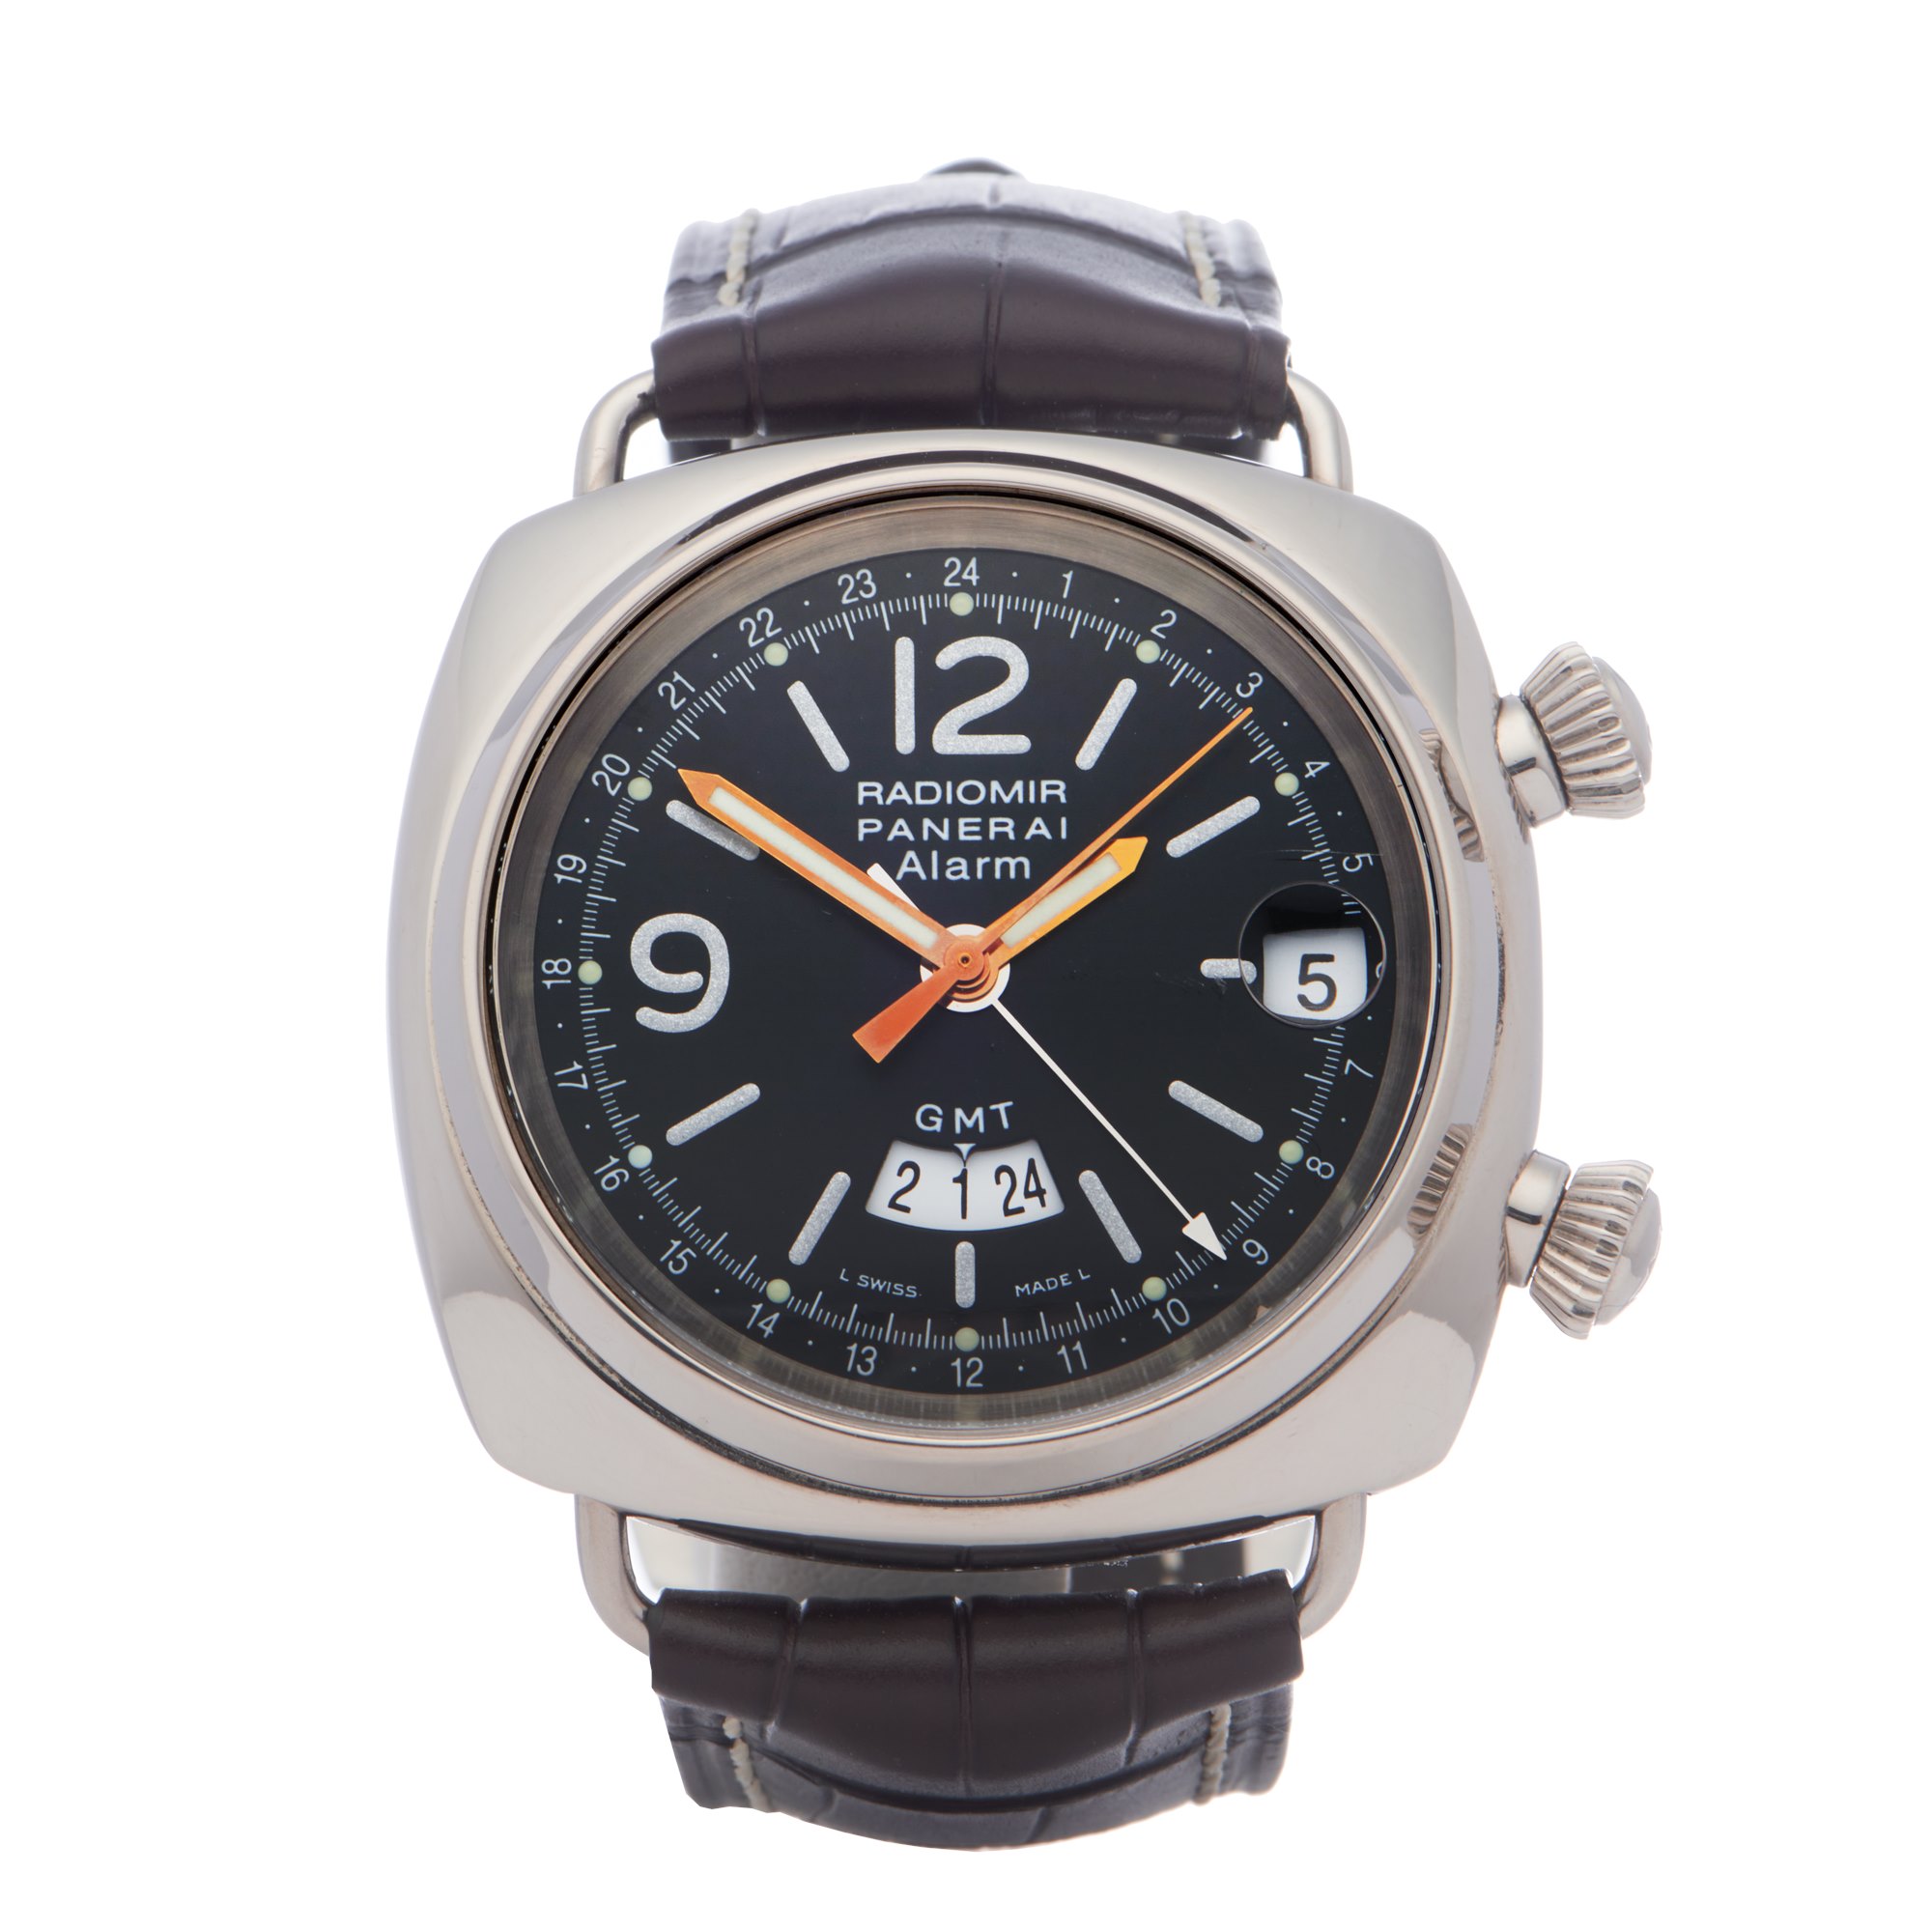 Panerai Radiomir Limited Edition of 60 Pieces 18K White Gold - PAM00046 Wit Goud PAM00046